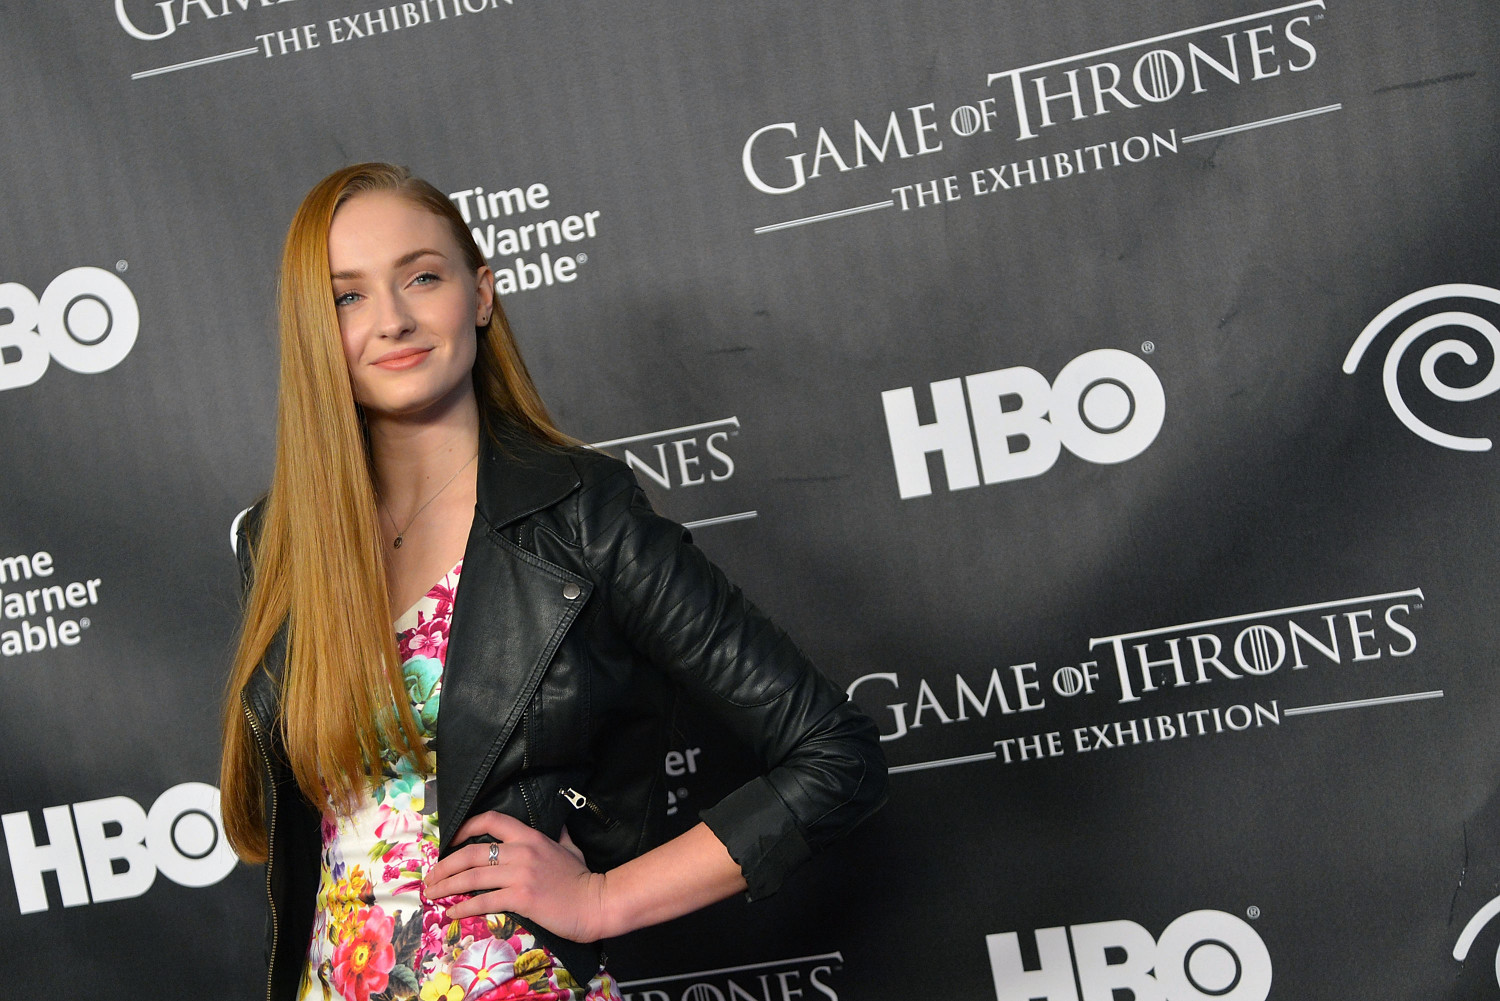 Sophie Turner’s Tattoo Turns Out to Be Major Spoiler for ‘Game of Thrones’ Ending